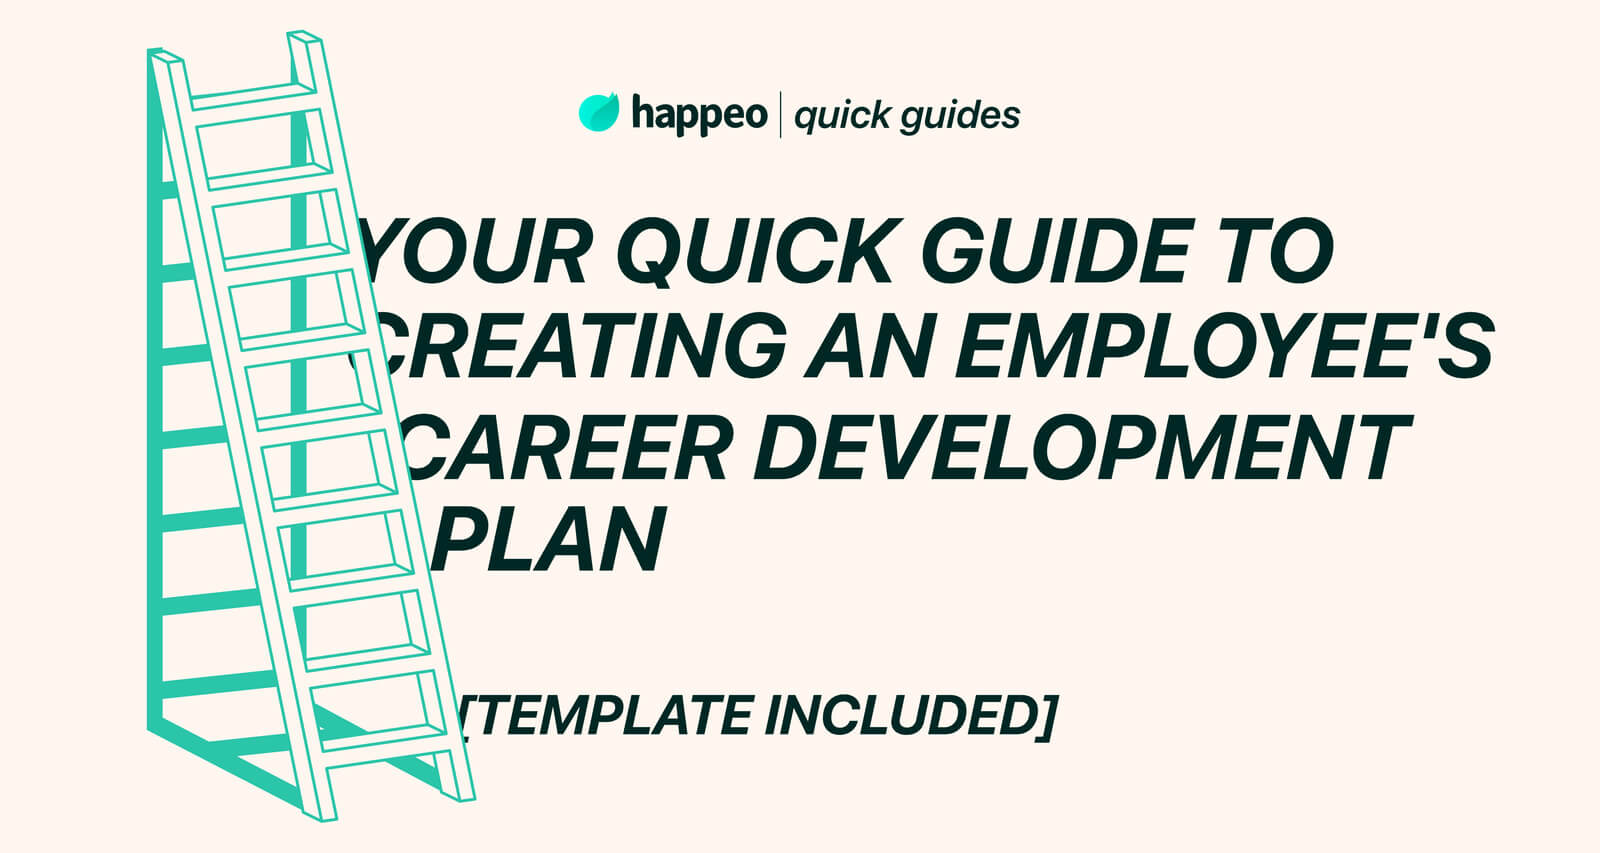 Your quick guide to creating a career development plan [incl. template]